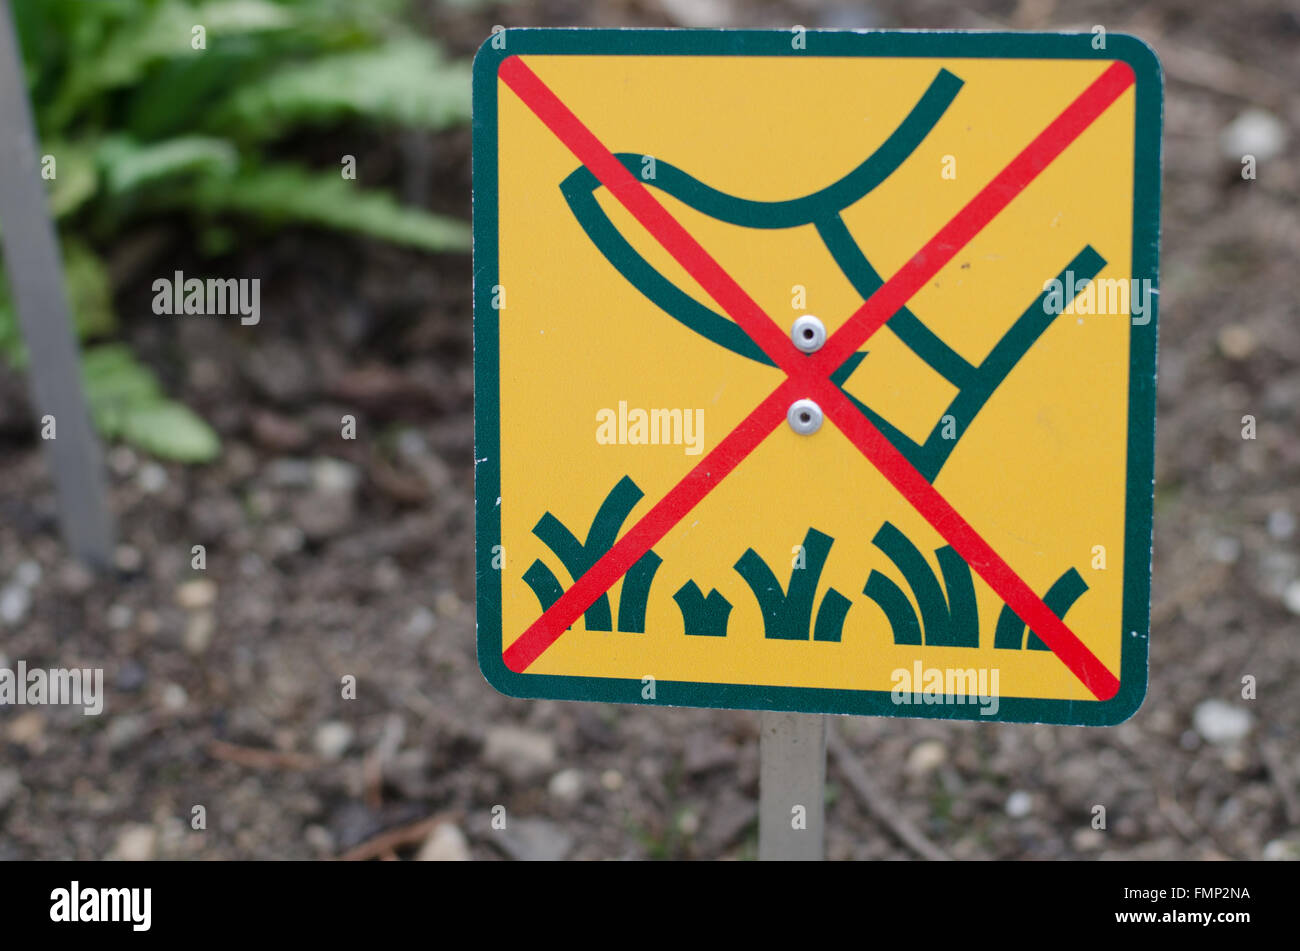 do not step on the grass symbol Stock Photo